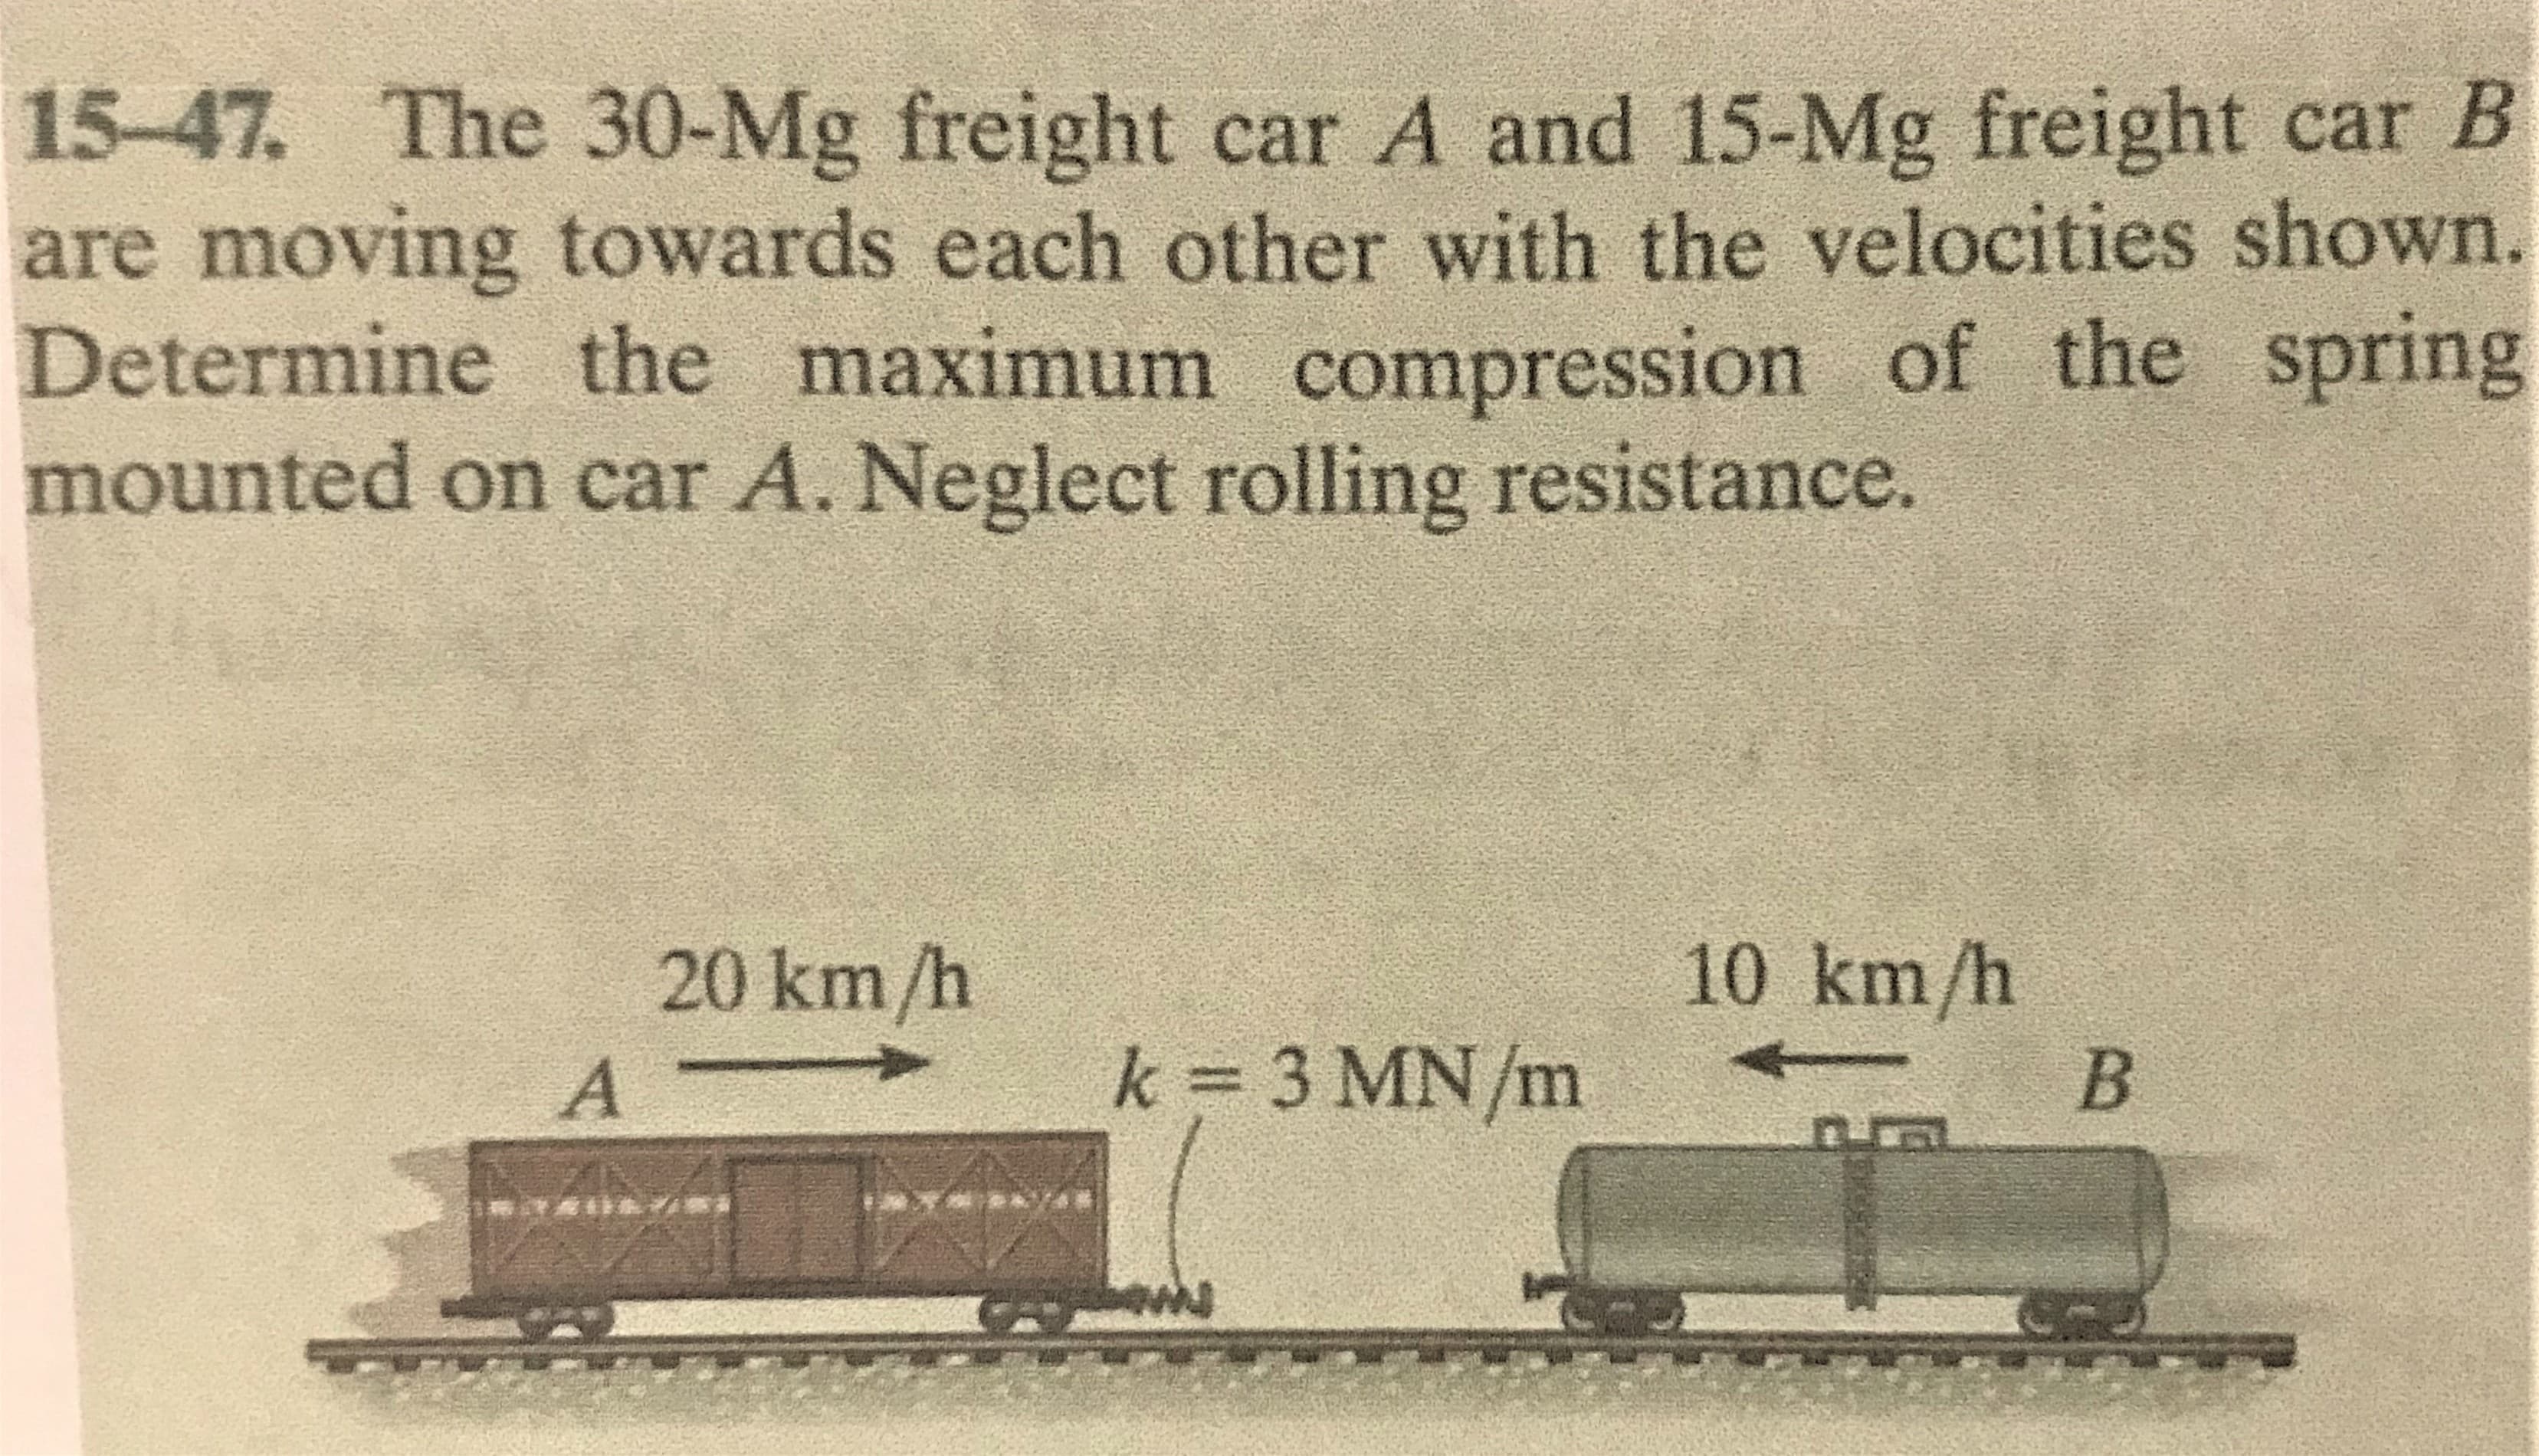 15-47. The 30-Mg freight car A and 15-Mg freight car B
are moving towards each other with the velocities shown.
Determine the maximum compression of the spring
mounted on car A. Neglect rolling resistance.
20 km/h
10 km/h
k 3 MN/m
